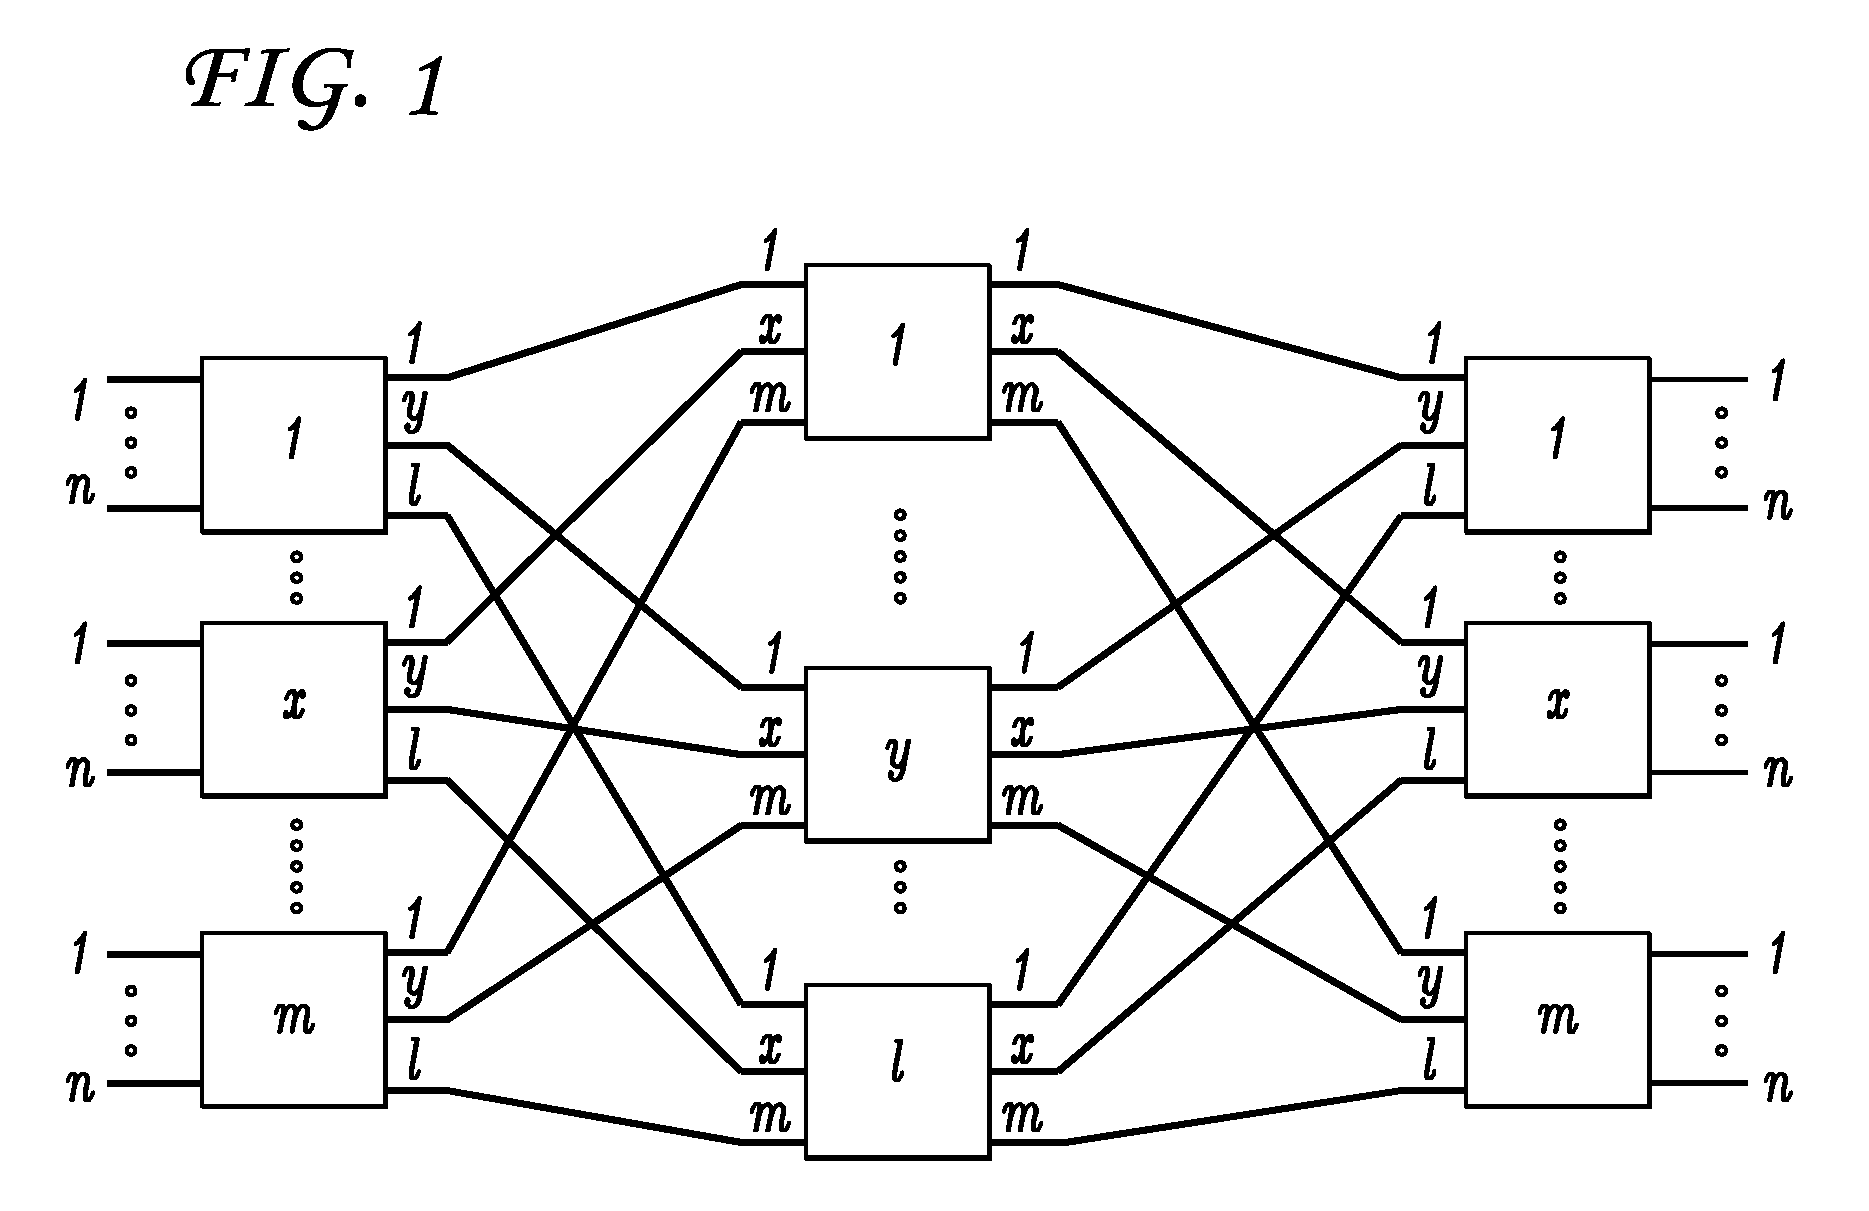 Load Balancing Algorithms in Non-Blocking Multistage Packet Switches